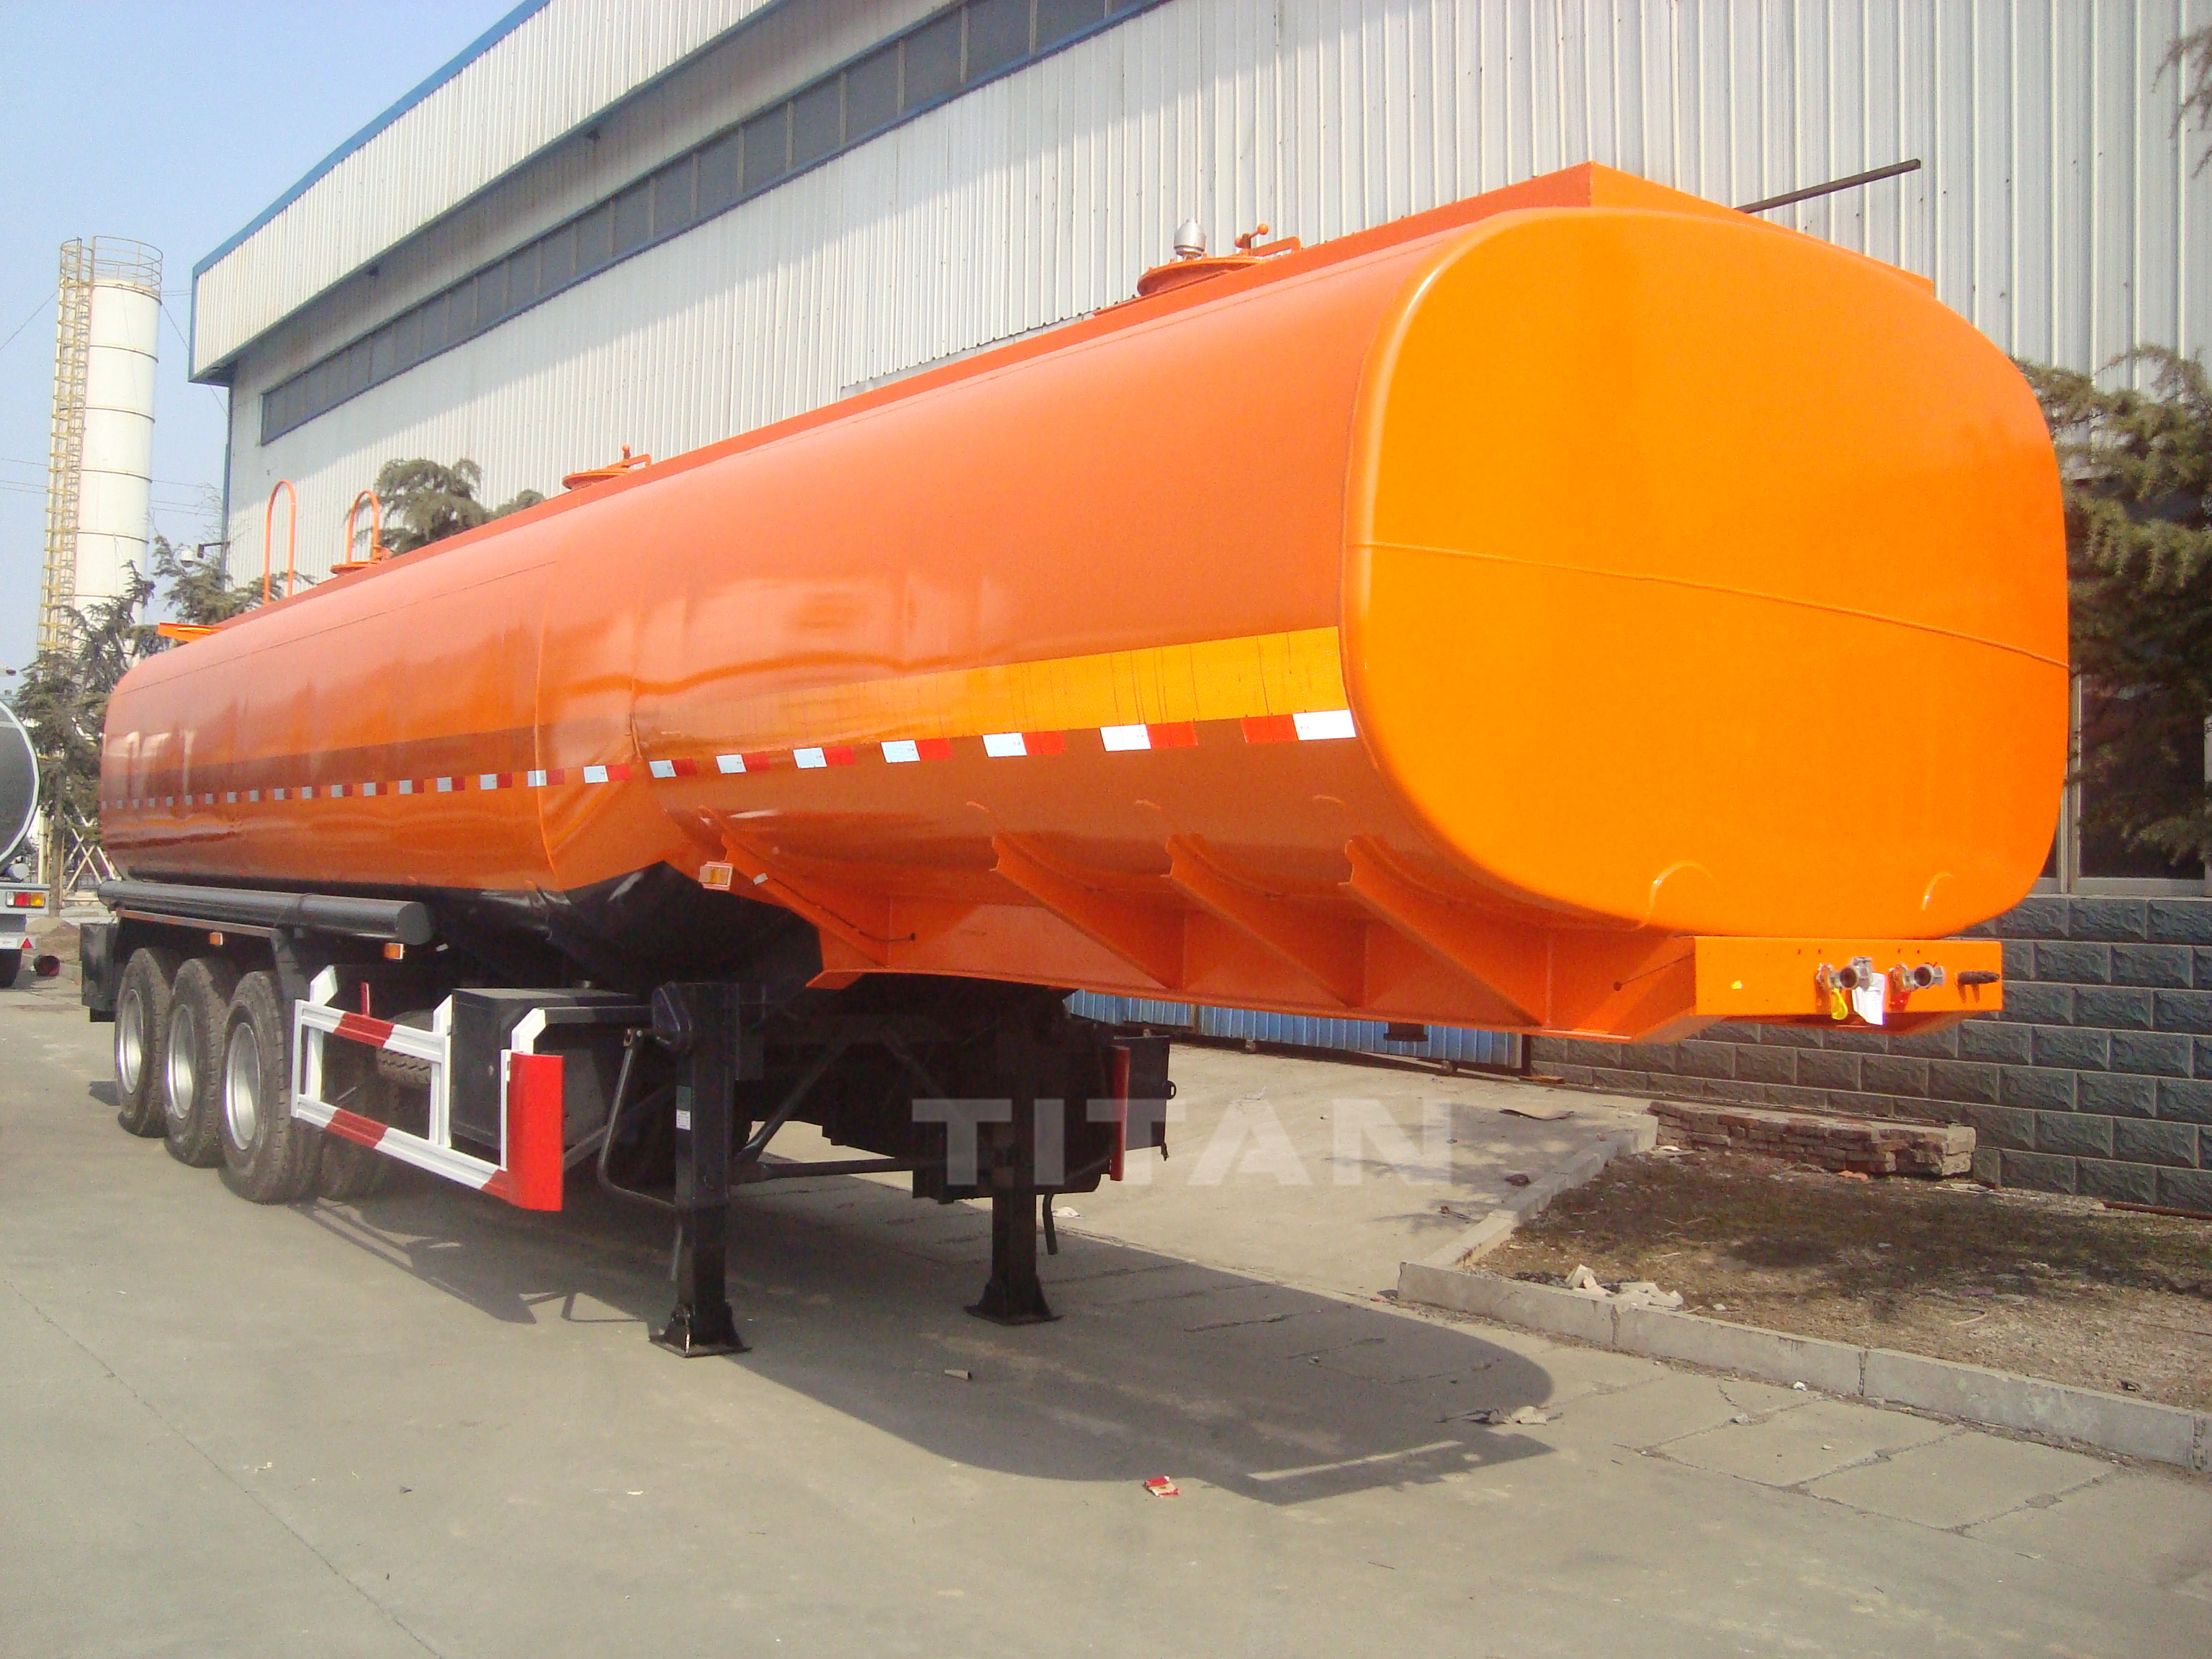 Fuel tanker trailer transport diesel, gasoline and other liquid objects, saving the packaging cost, improved transportation efficiency.